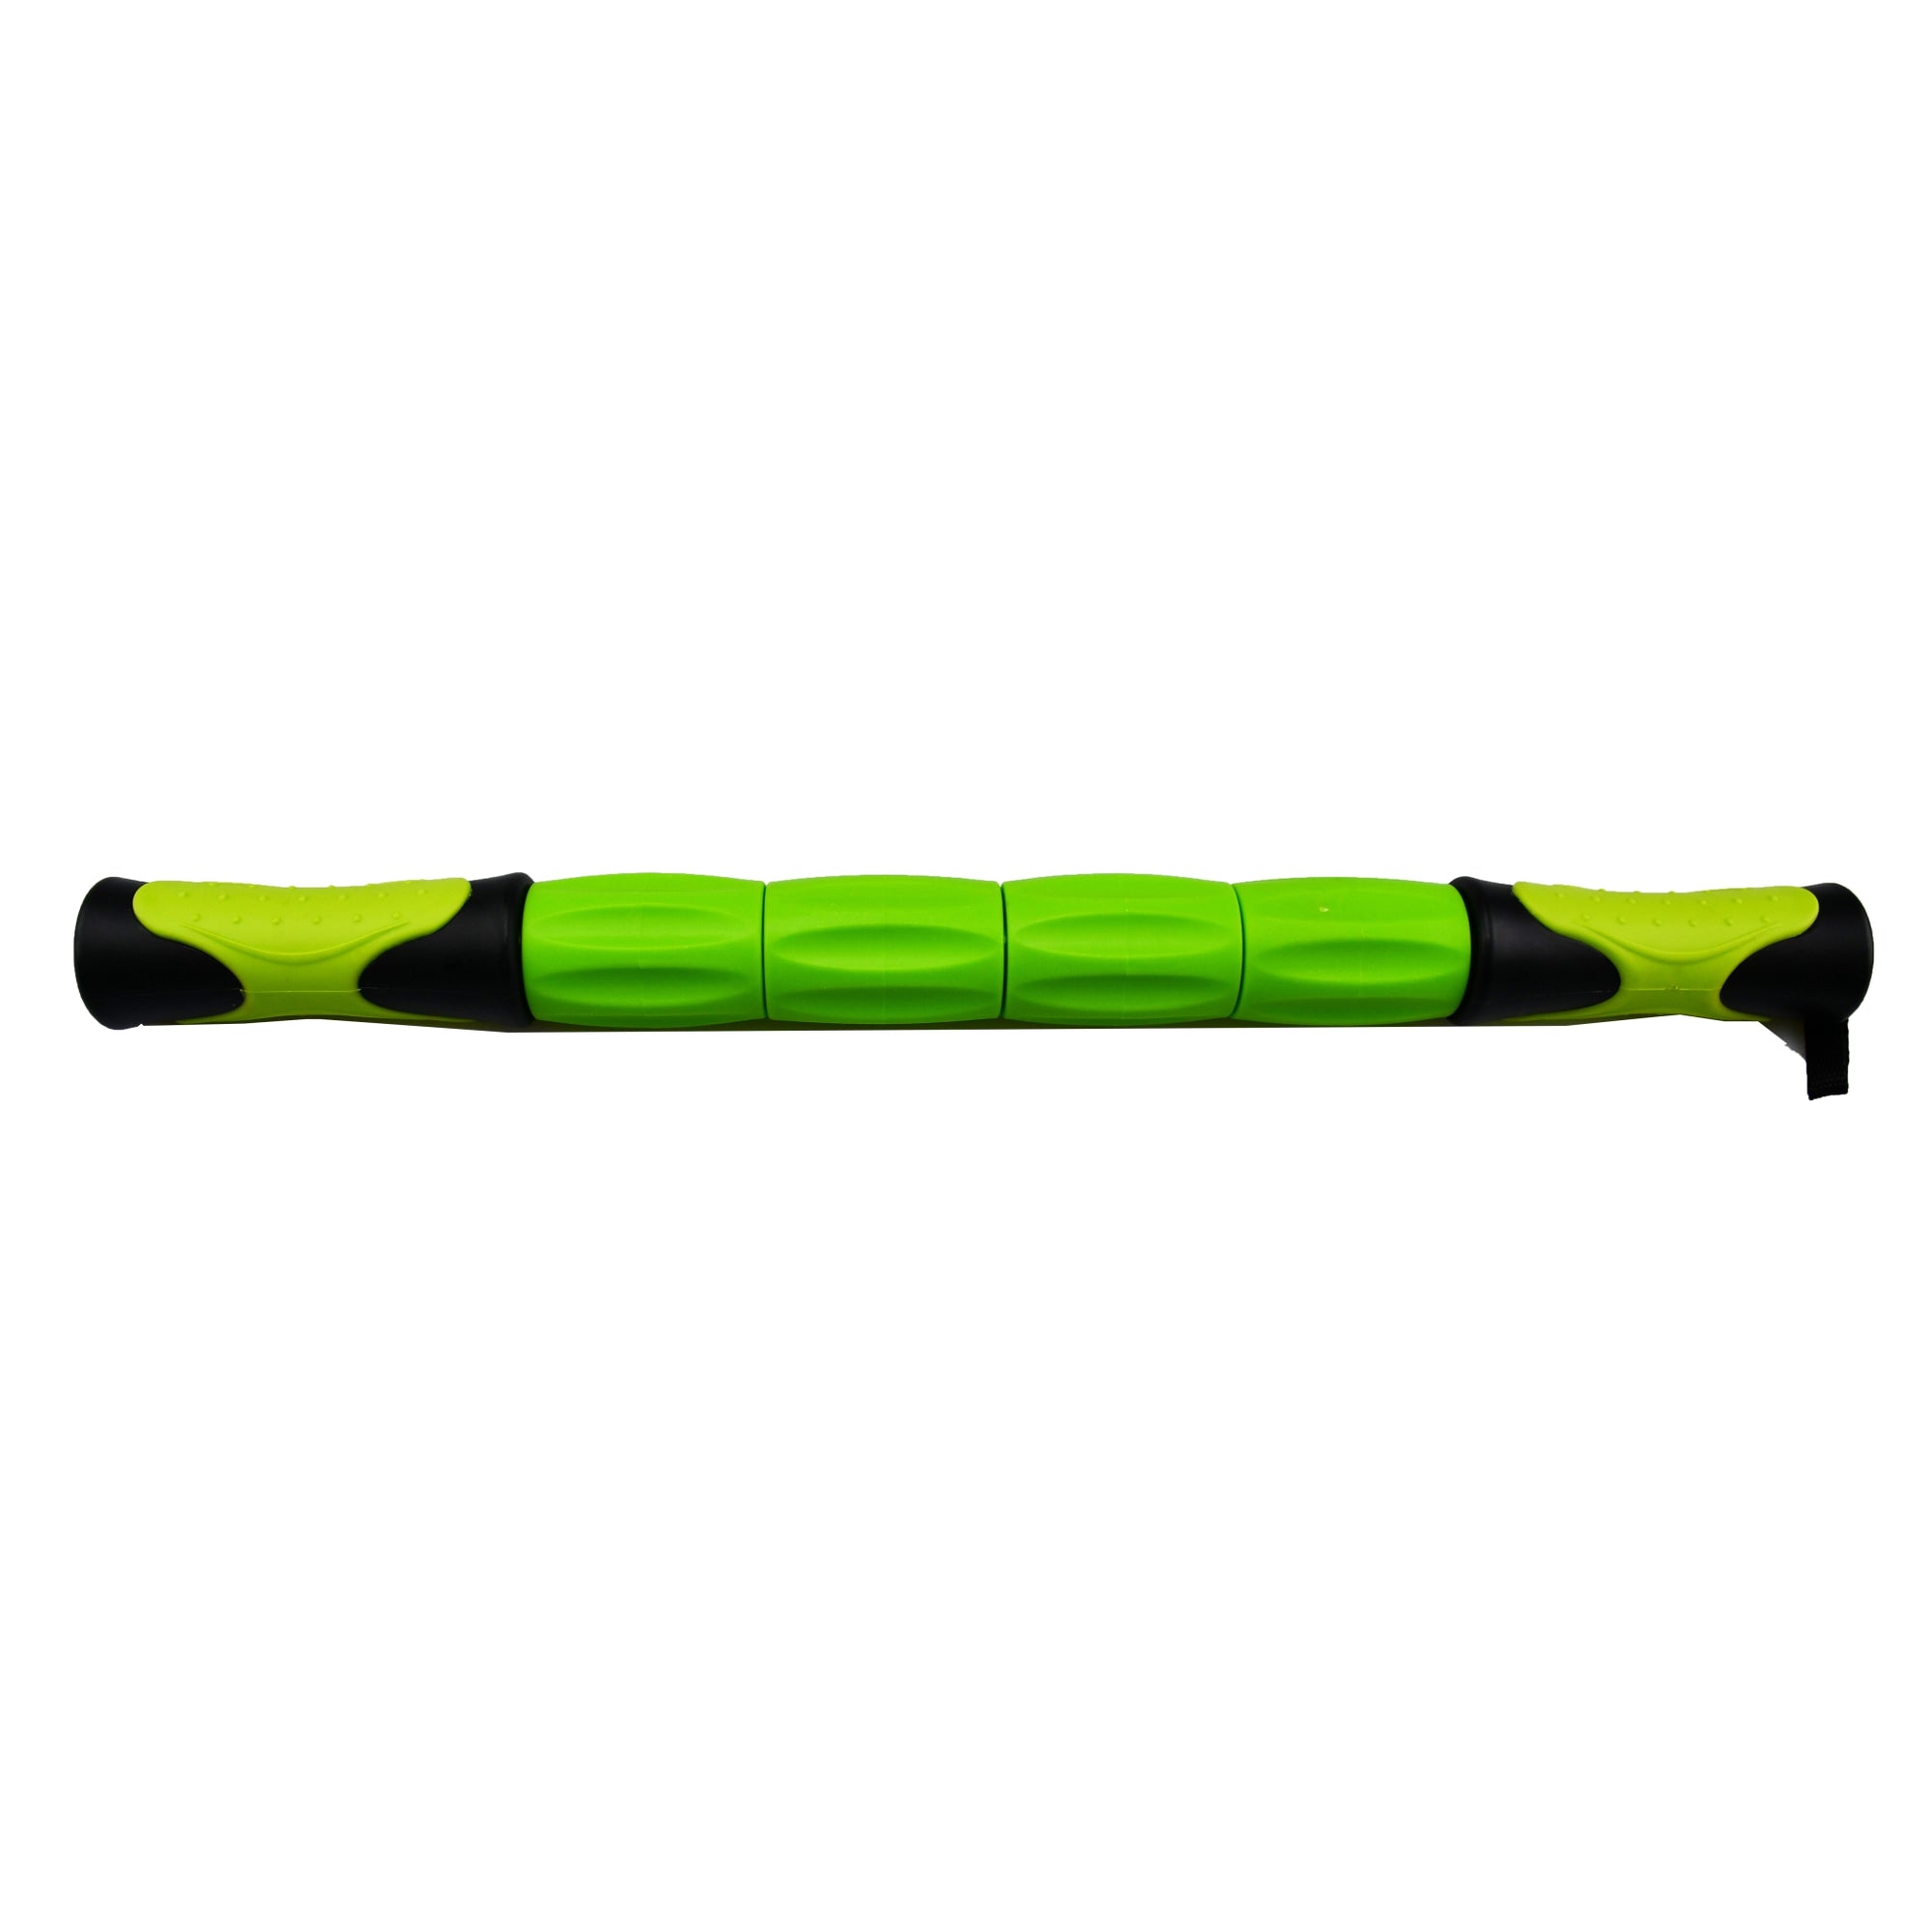 UFE MAssage Stick with green and black easy grip handles, and 4 independent green rollers in the middle of the stick